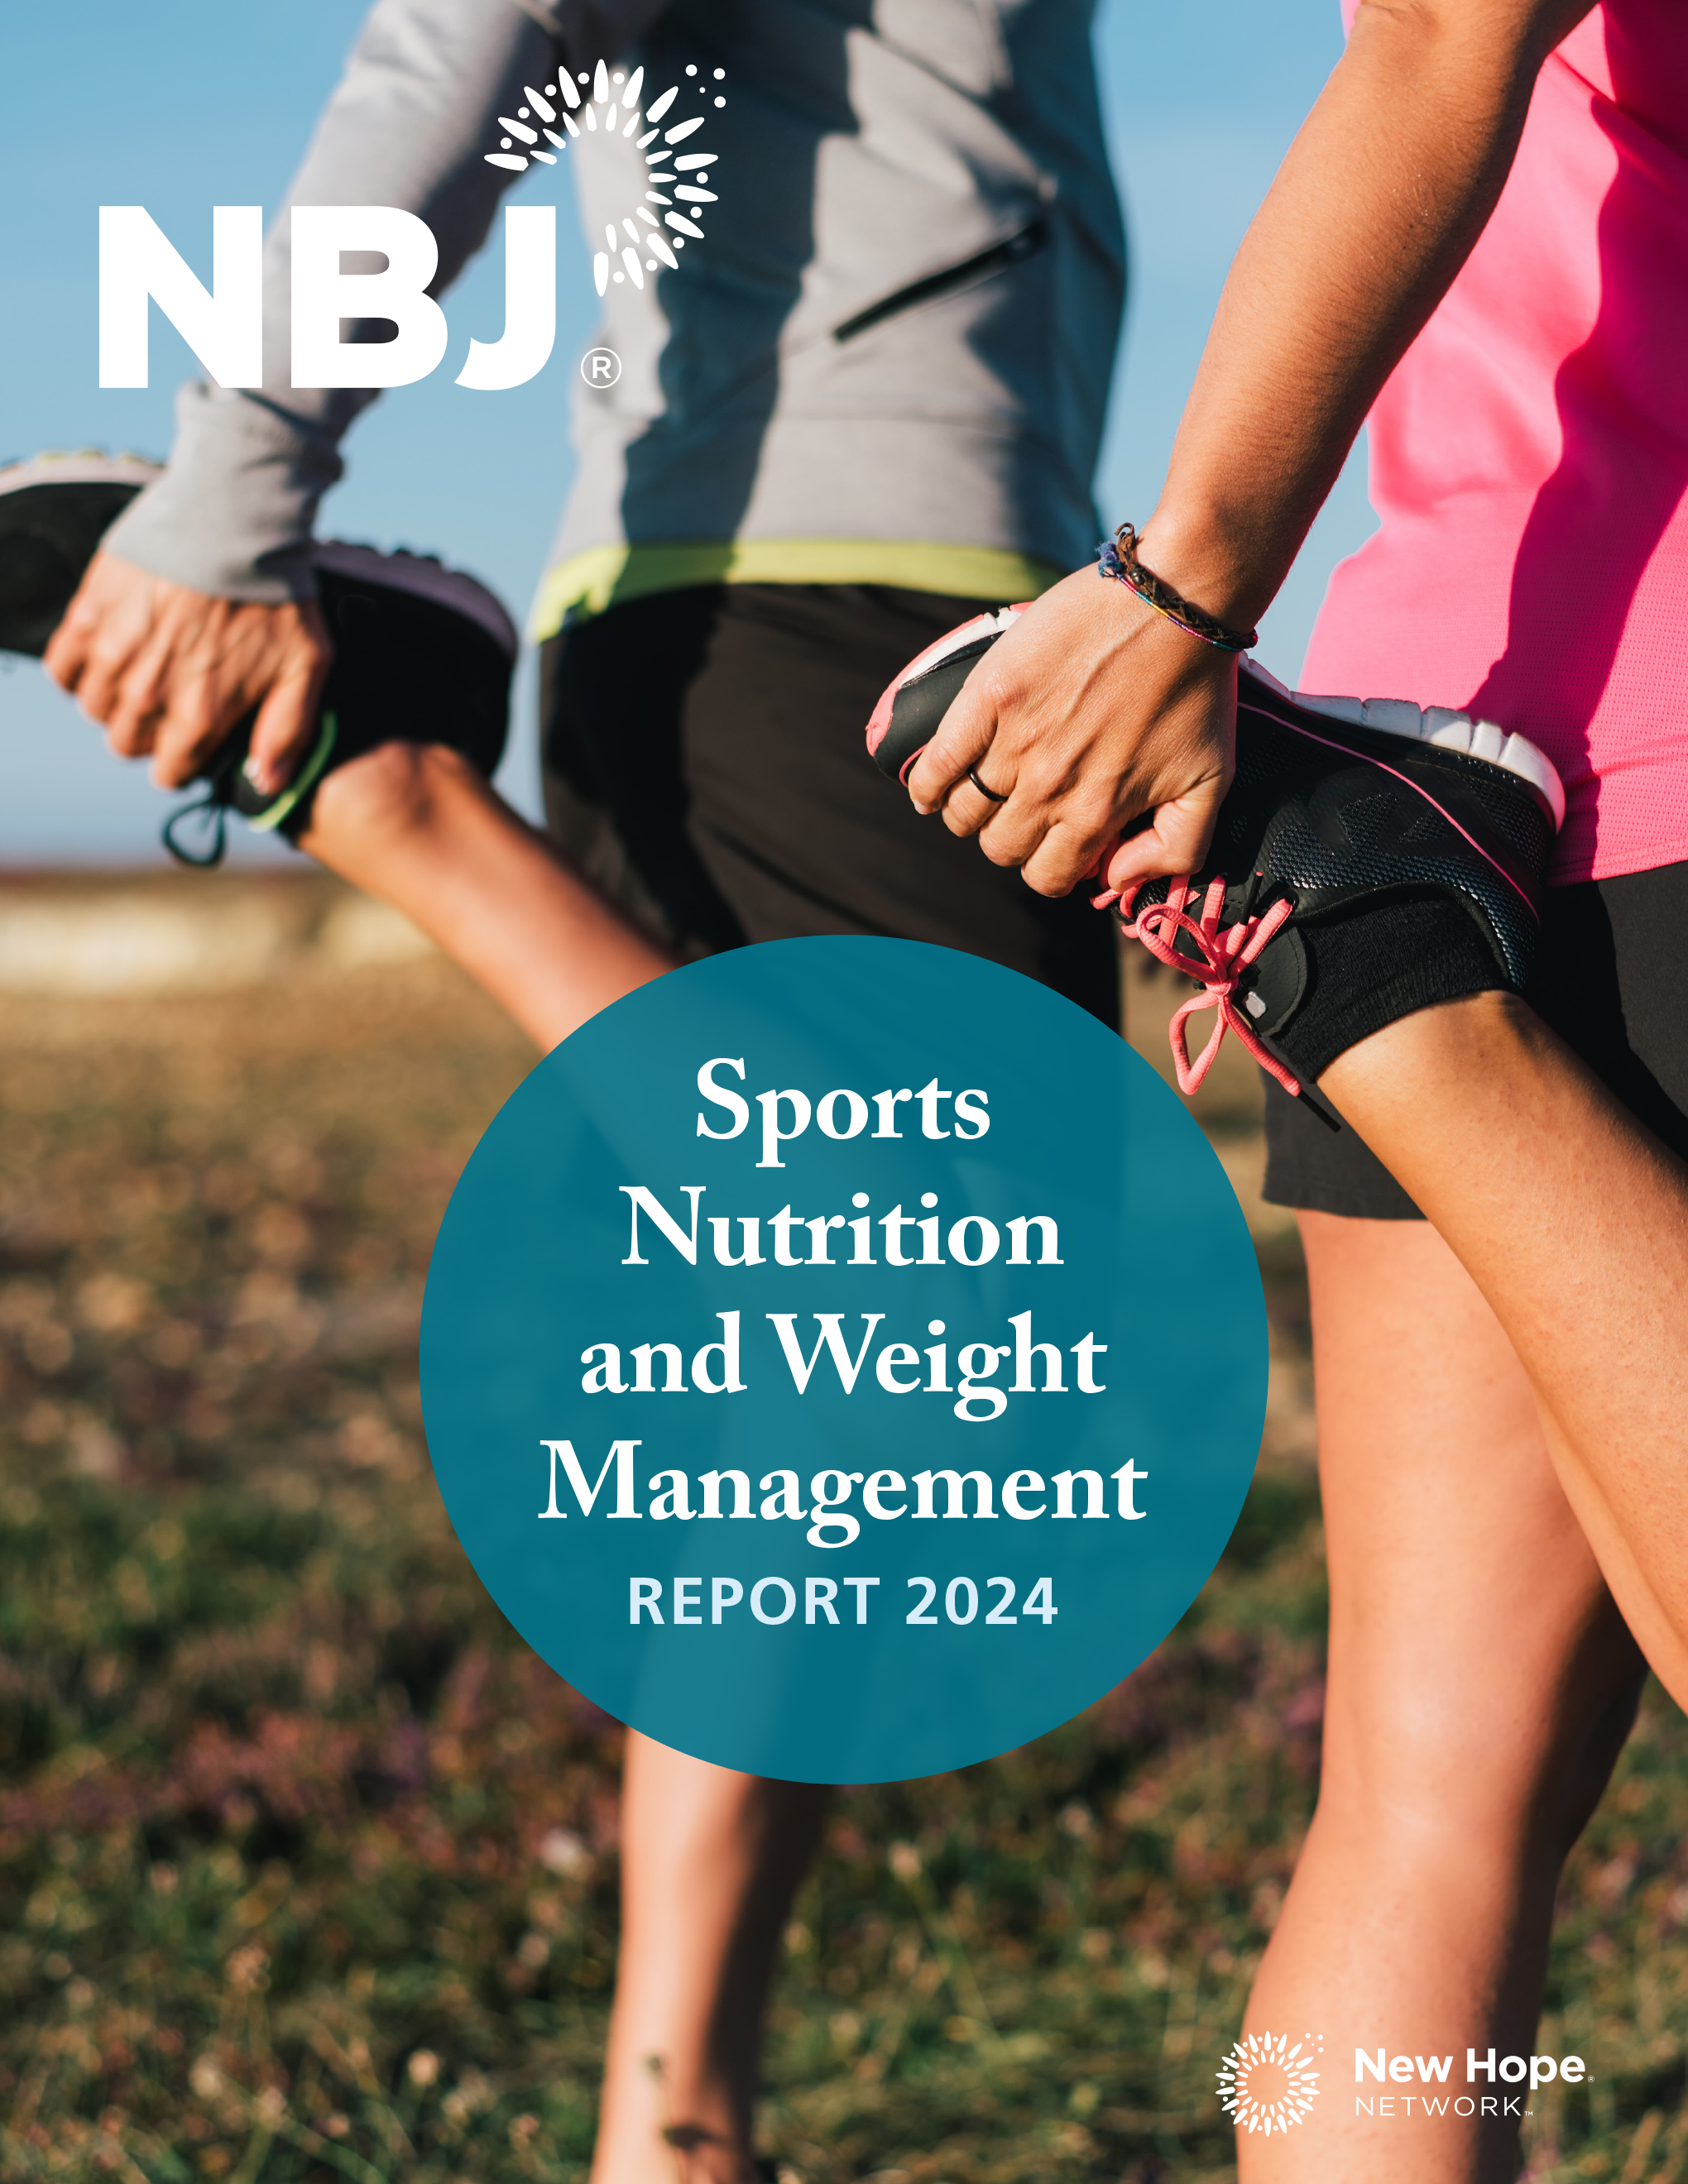 NBJ's Sports Nutrition and Weight Management Report